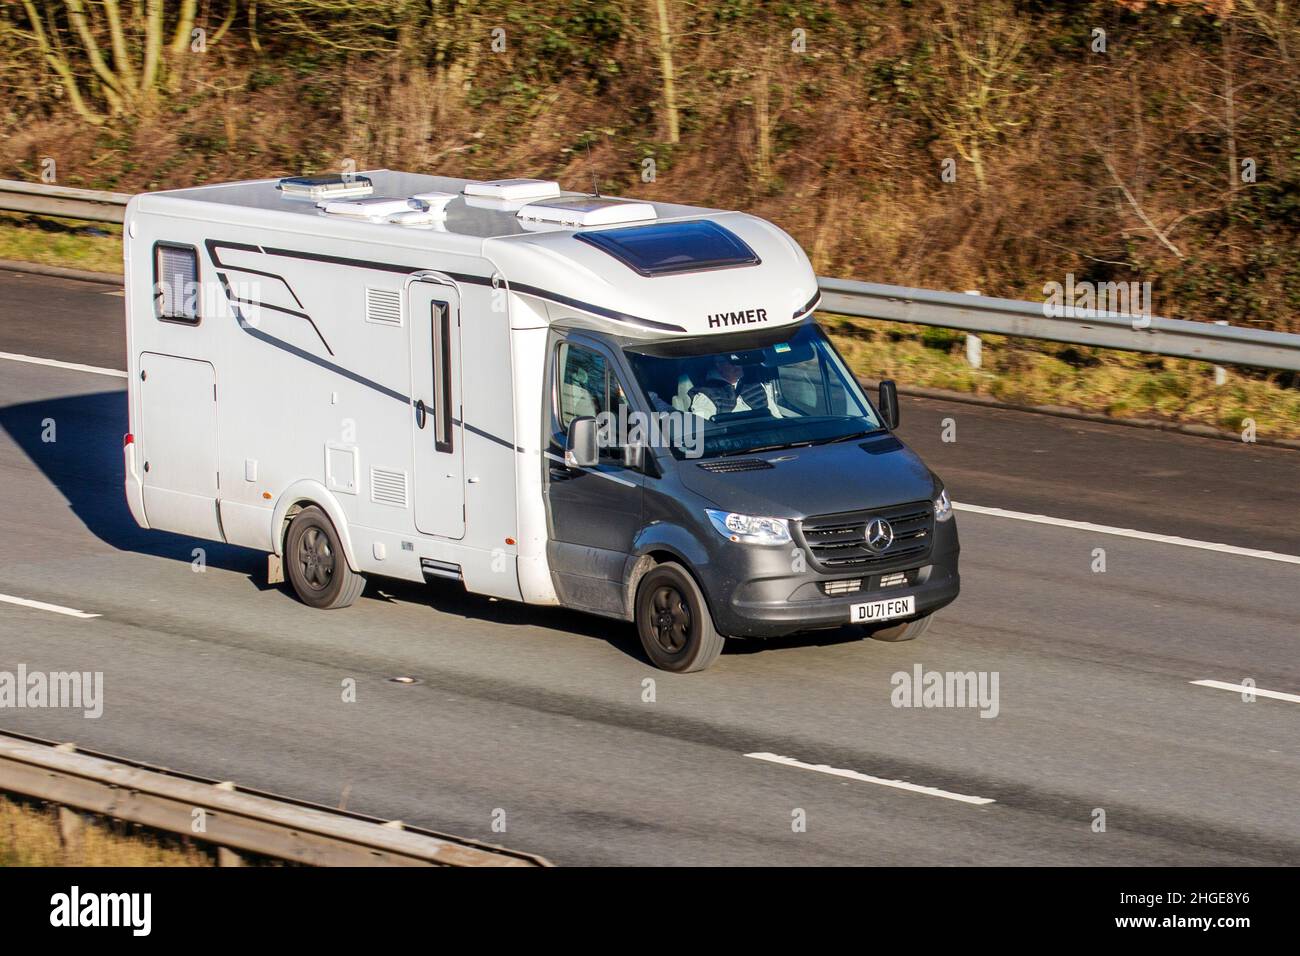 2021 Mercedes Benz Hymer T-Class S680 Auto, 2143cc Diesel. Caravans and Motorhomes, campervans on Britain's roads, RV leisure vehicle, family holidays, caravanette vacations, Touring caravan holiday, van conversions, Vanagon autohome, Stock Photo